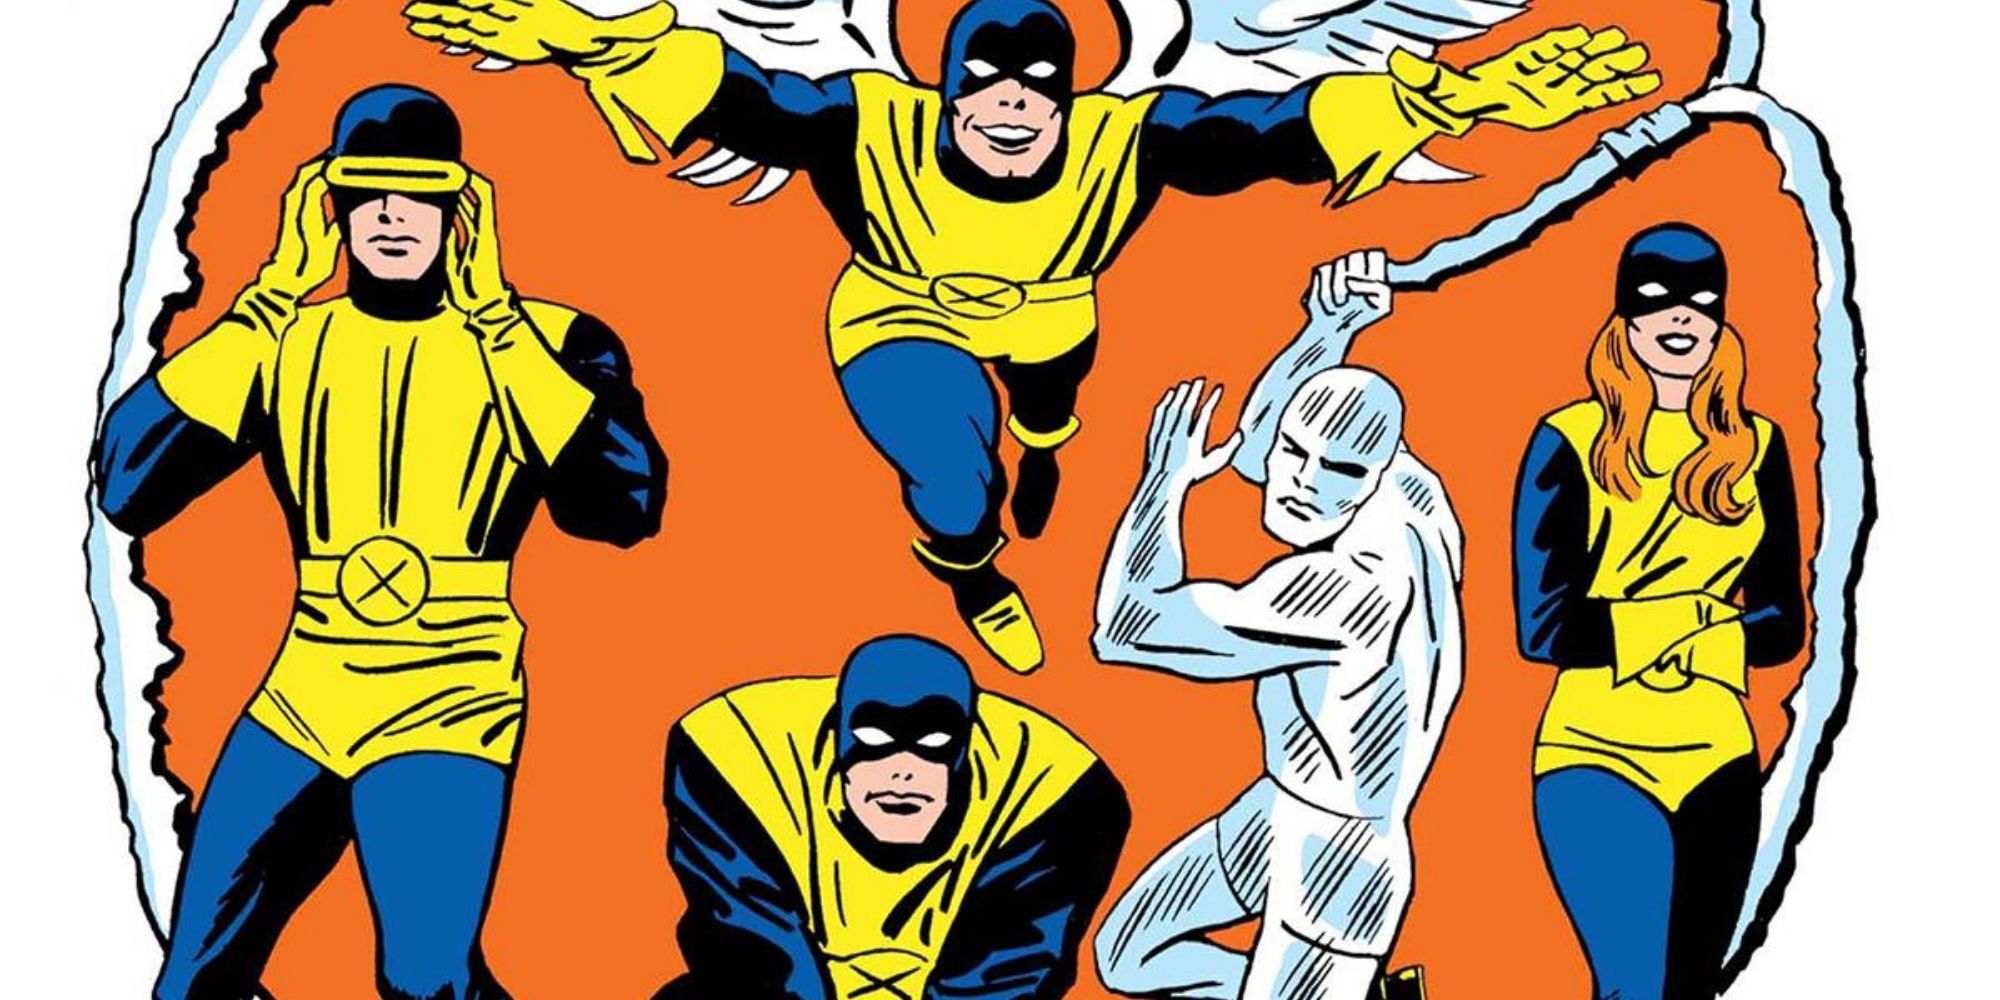 The original five members of the X-Men in a cover for one of their Silver Age comics